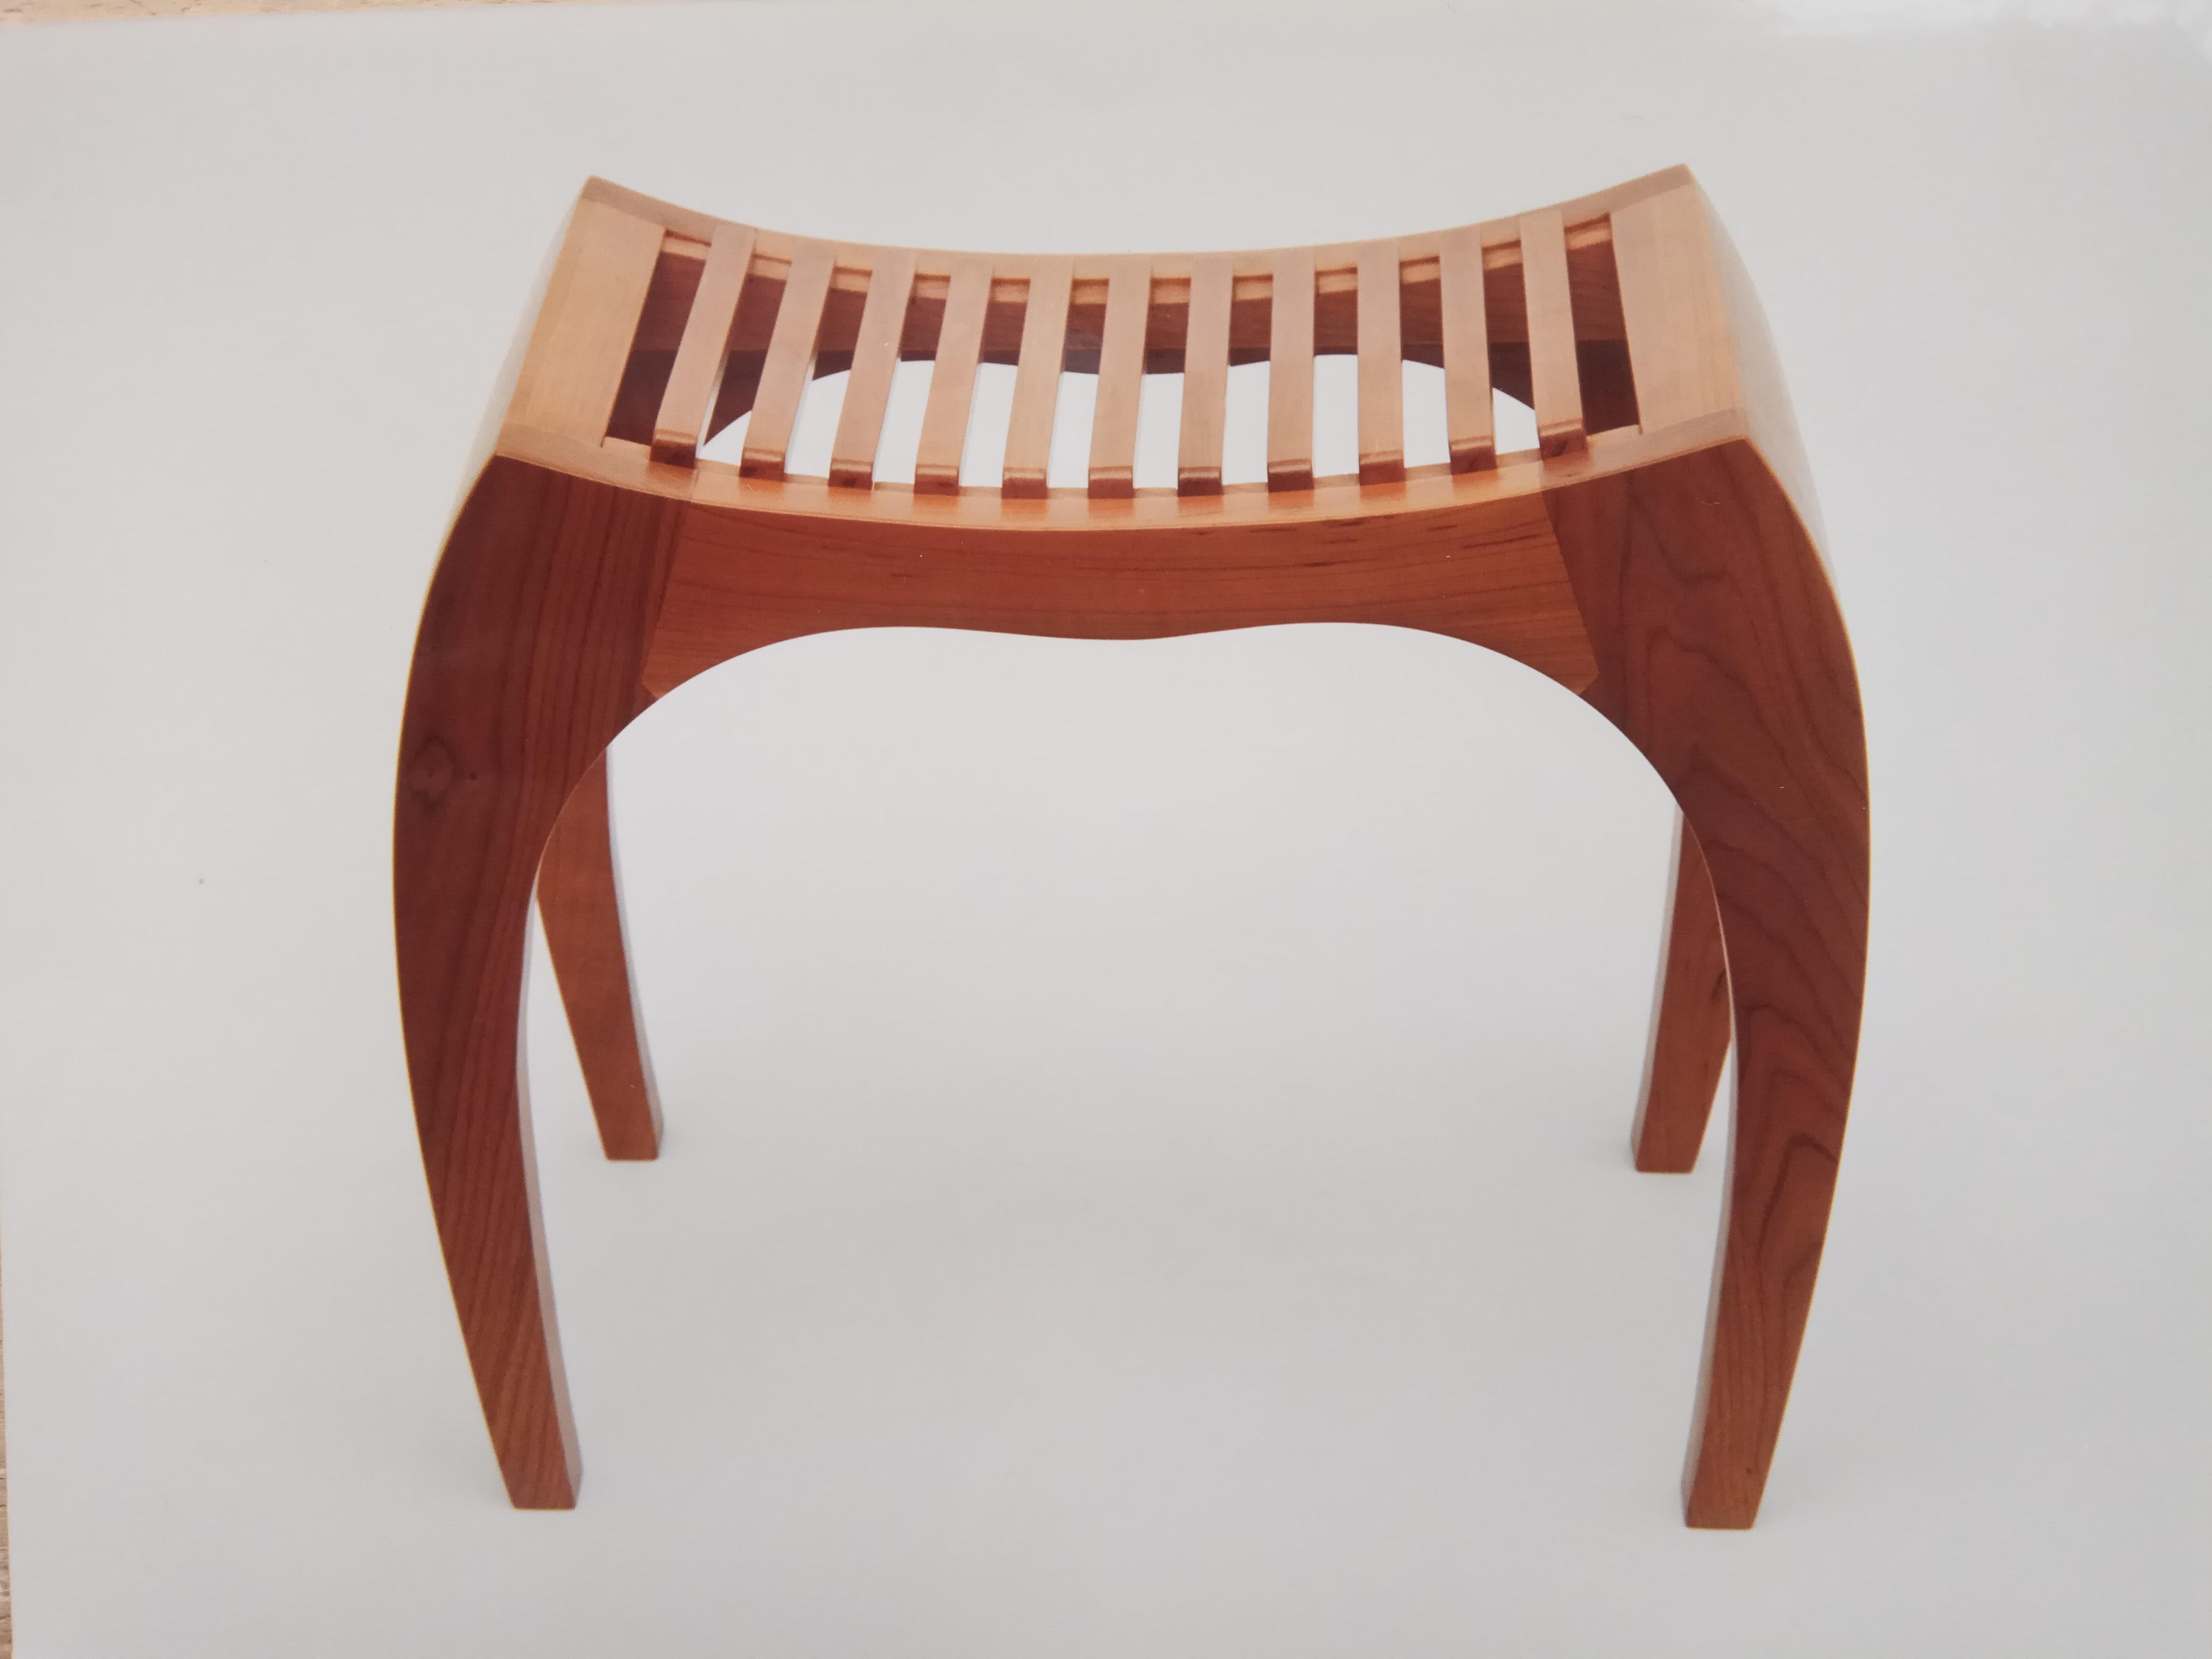 Rumbo stool by Jean-Baptiste Van den Heede
Signed and numbered
Dimensions: L 45 x W 31 x H 40 cm
Materials: solid cherrywood

Also available in Iroko wood and other woods on demand.
   

The Rumbo stool is a unique, limited series design and